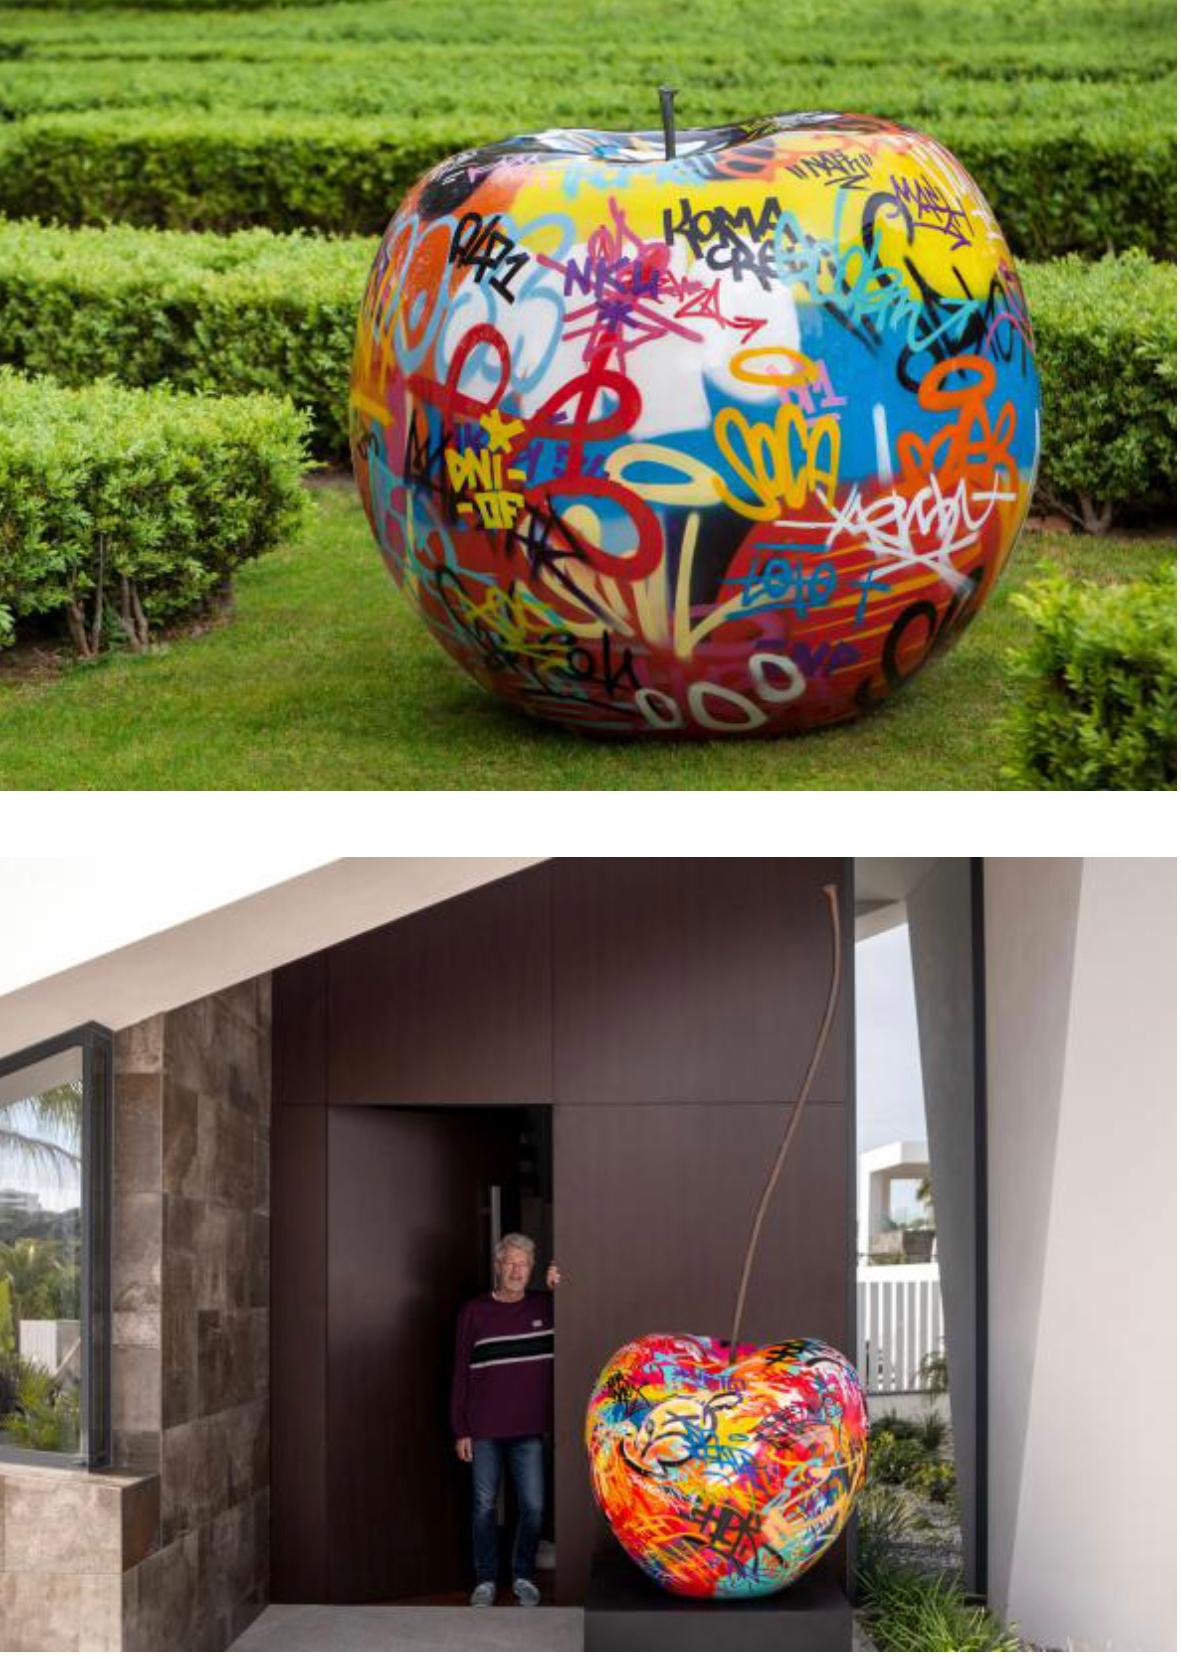 Graffiti Apple 3D Sculpture (Giant) - Contemporary Mixed Media Art by Bruno